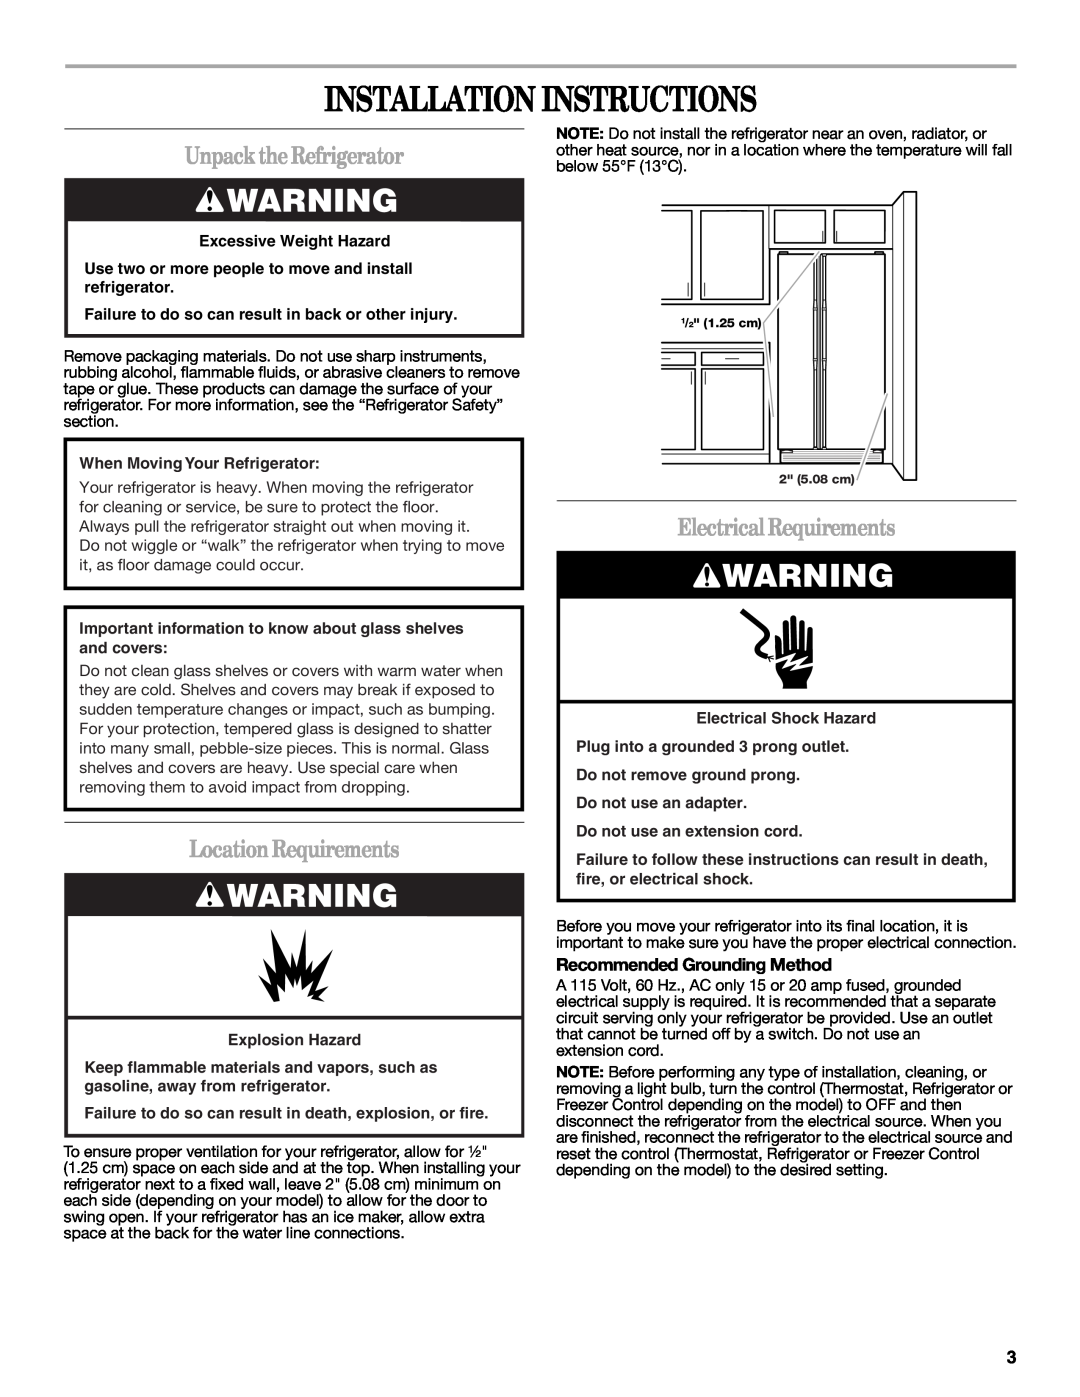 Whirlpool GS5SHAXNT Installation Instructions, UnpacktheRefrigerator, LocationRequirements, Electrical Requirements 